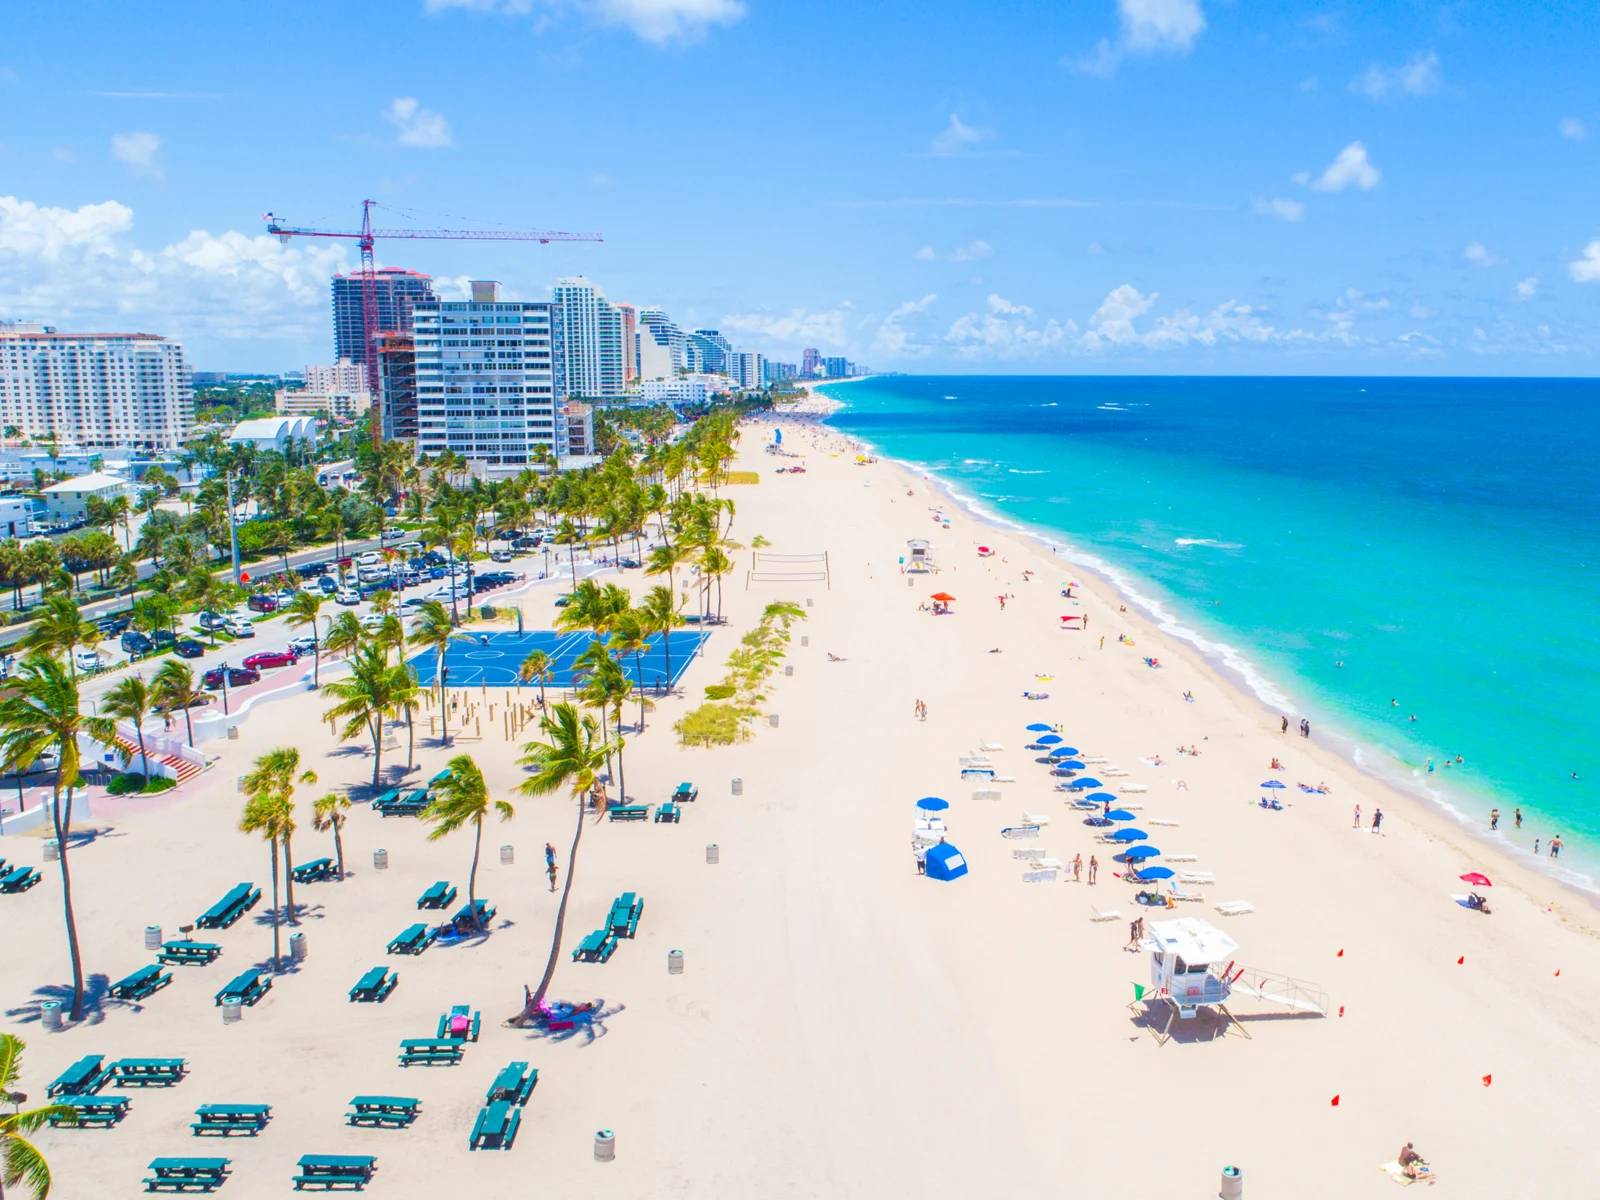 Aerial photo showing the whole span of Fort Lauderdale Beach, one of the best things to do in Fort Lauderdale, with few beach goers, vacant benches, palm trees, and blue water